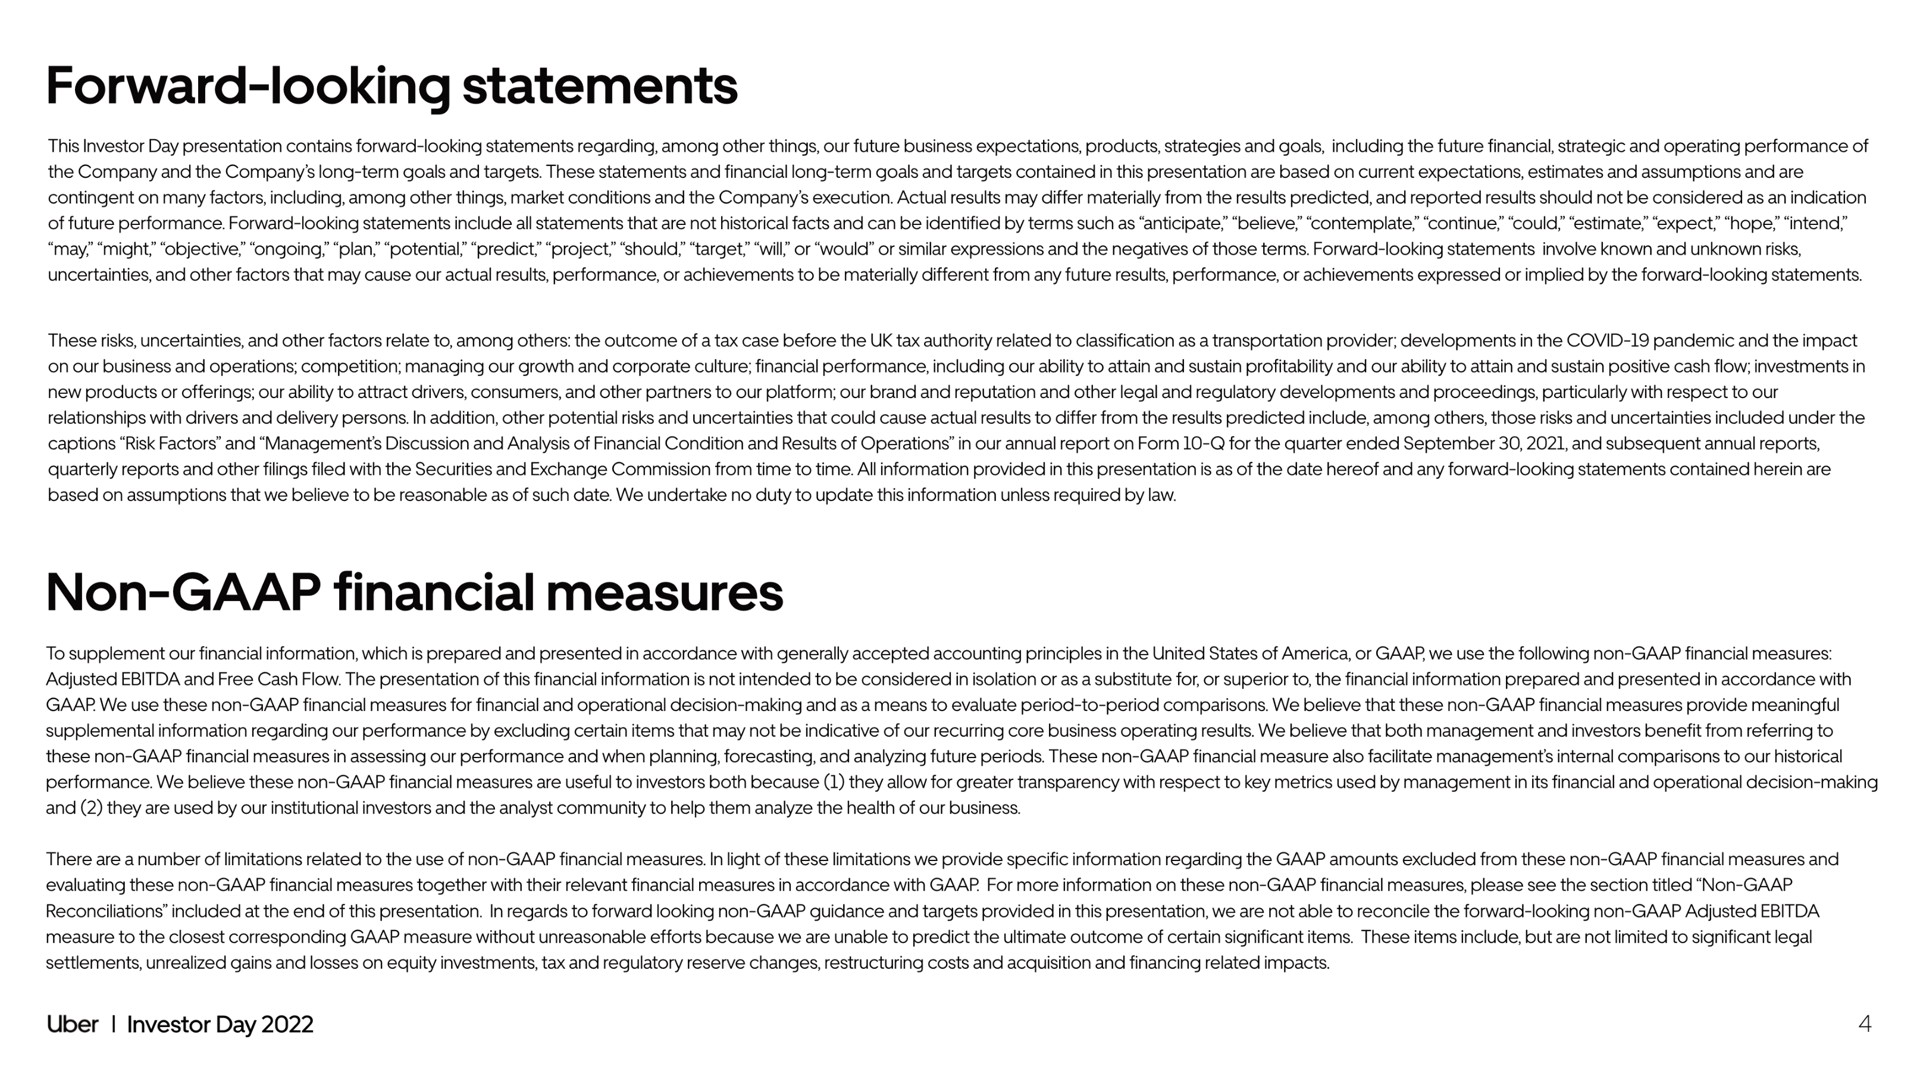 forward looking statements non financial measures | Uber